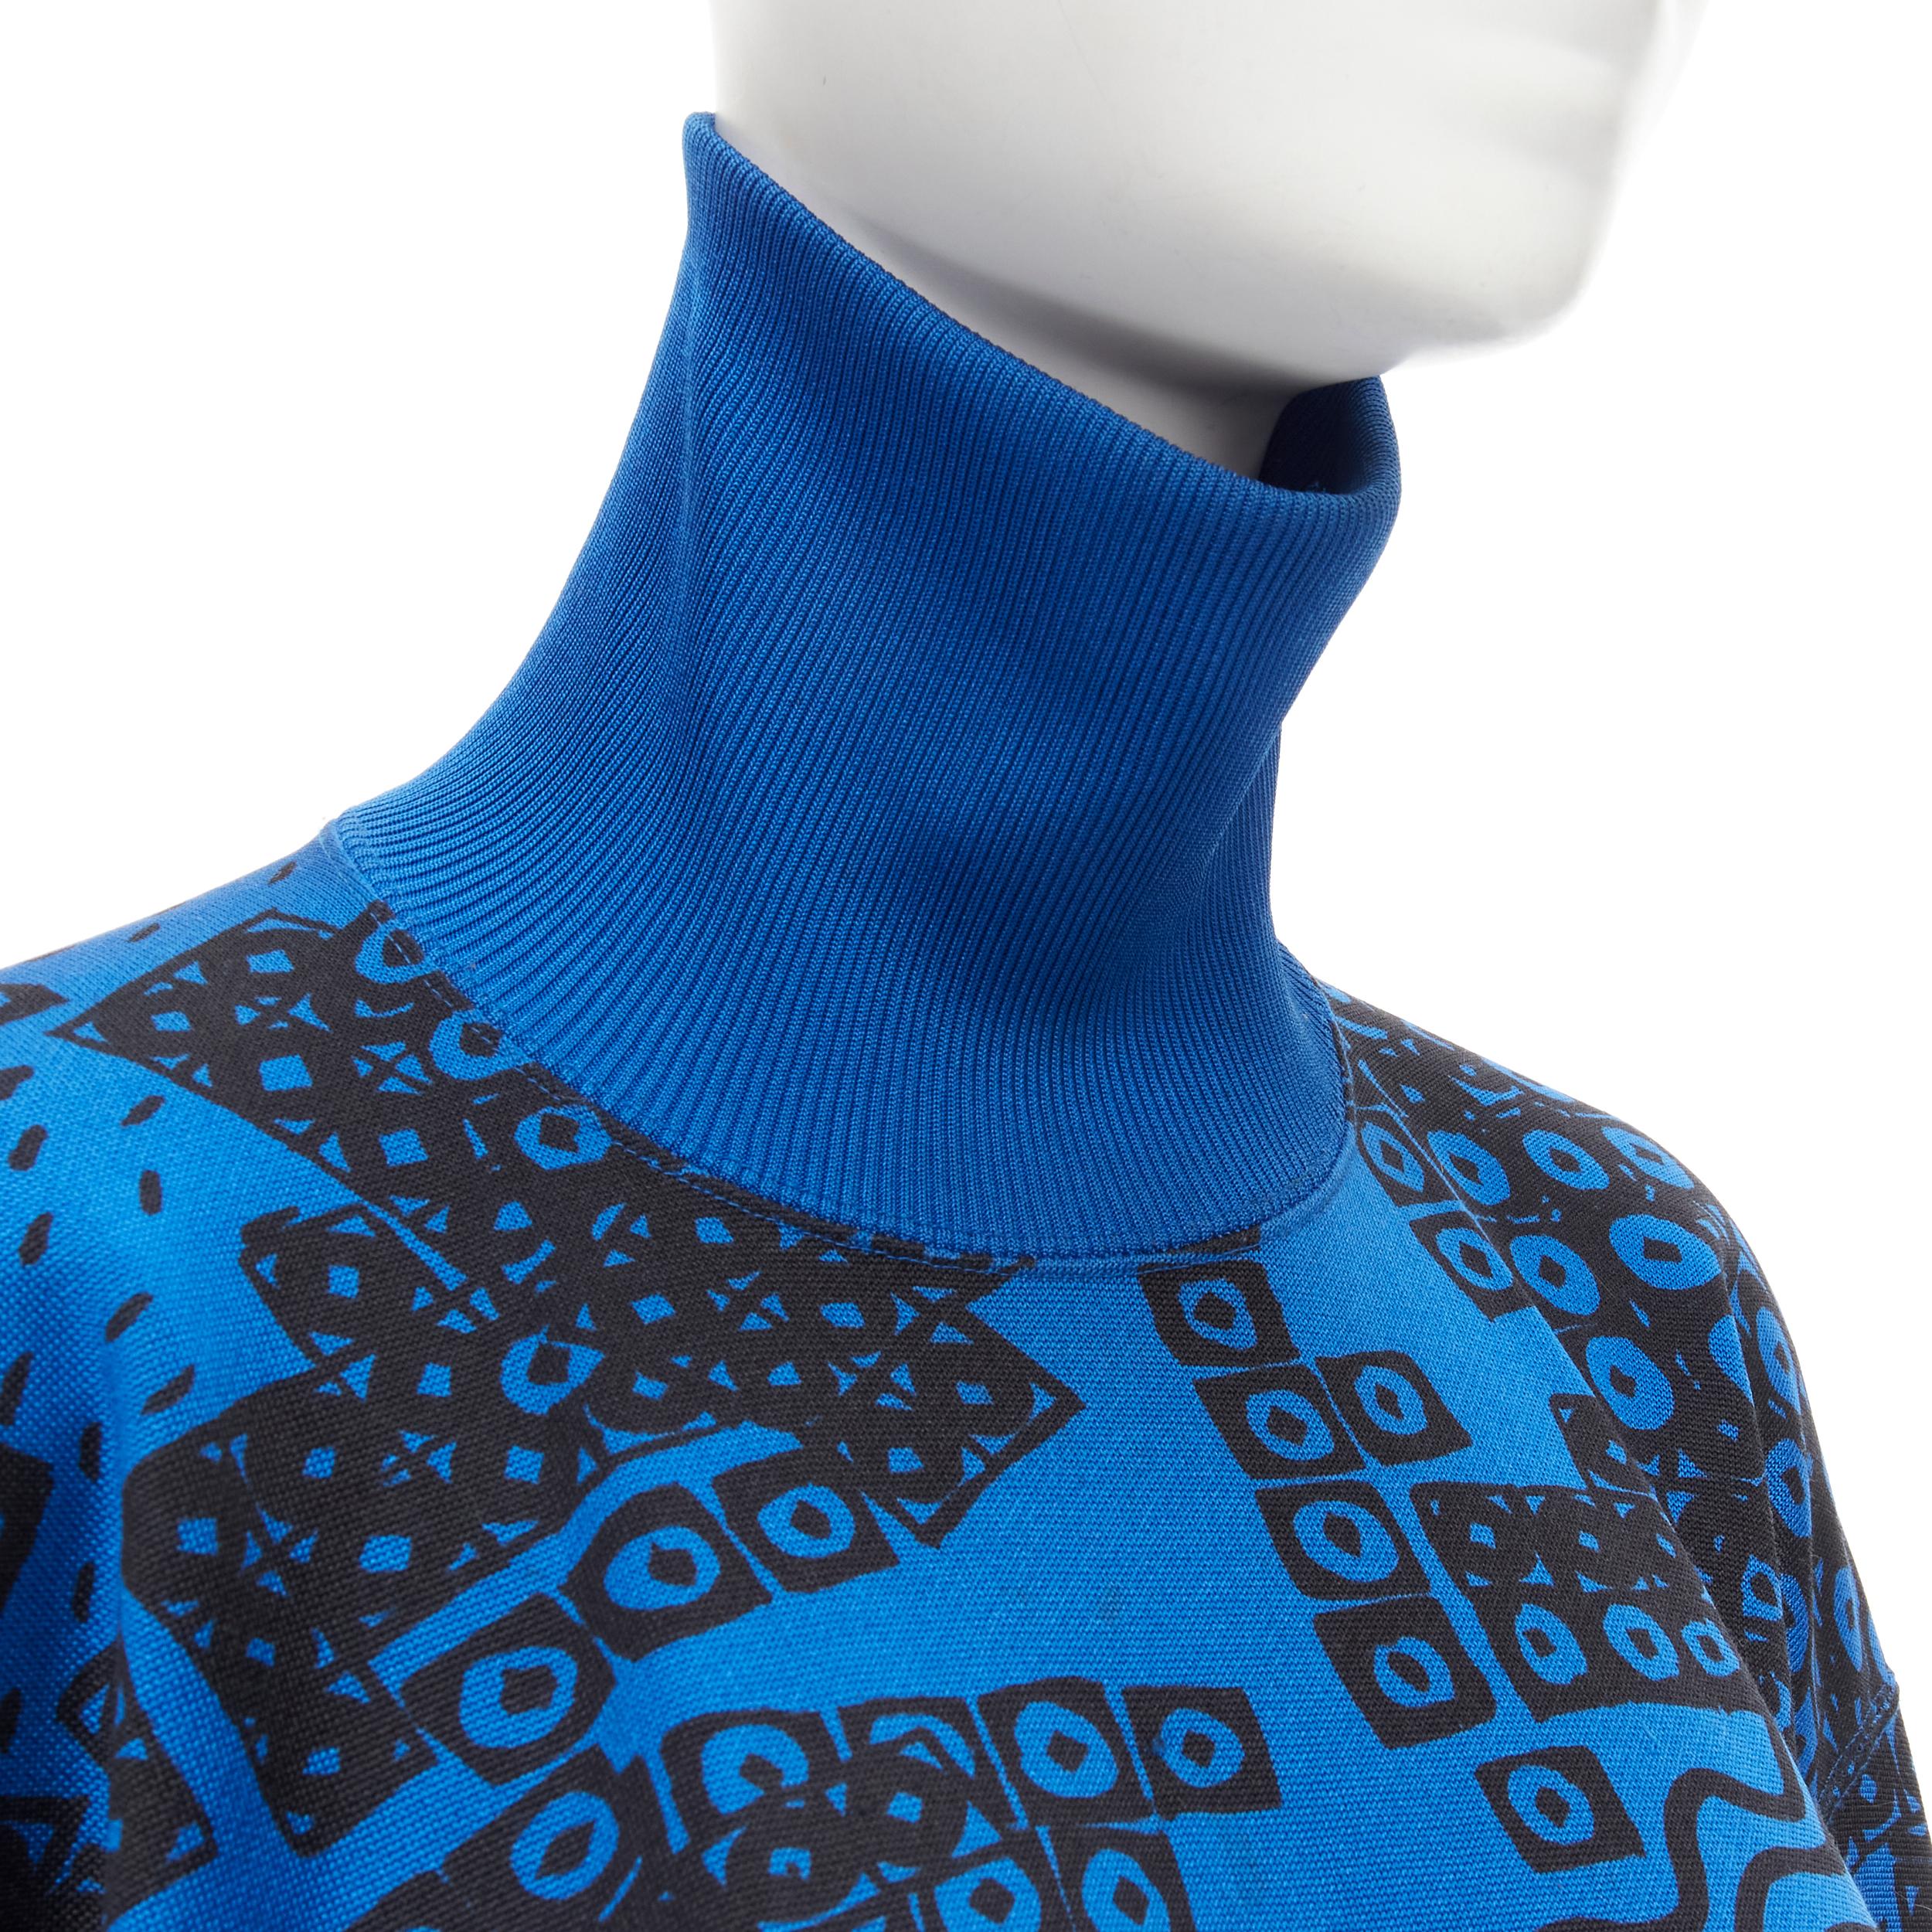 ISSEY MIYAKE 1980s blue black illustration print turtleneck sweater top M 
Reference: CRTI/A00476 
Brand: Issey Miyake 
Collection: 1980s 
Material: Cotton 
Color: Blue 
Pattern: Geometric 
Made in: Japan 

CONDITION: 
Condition: Good, this item was